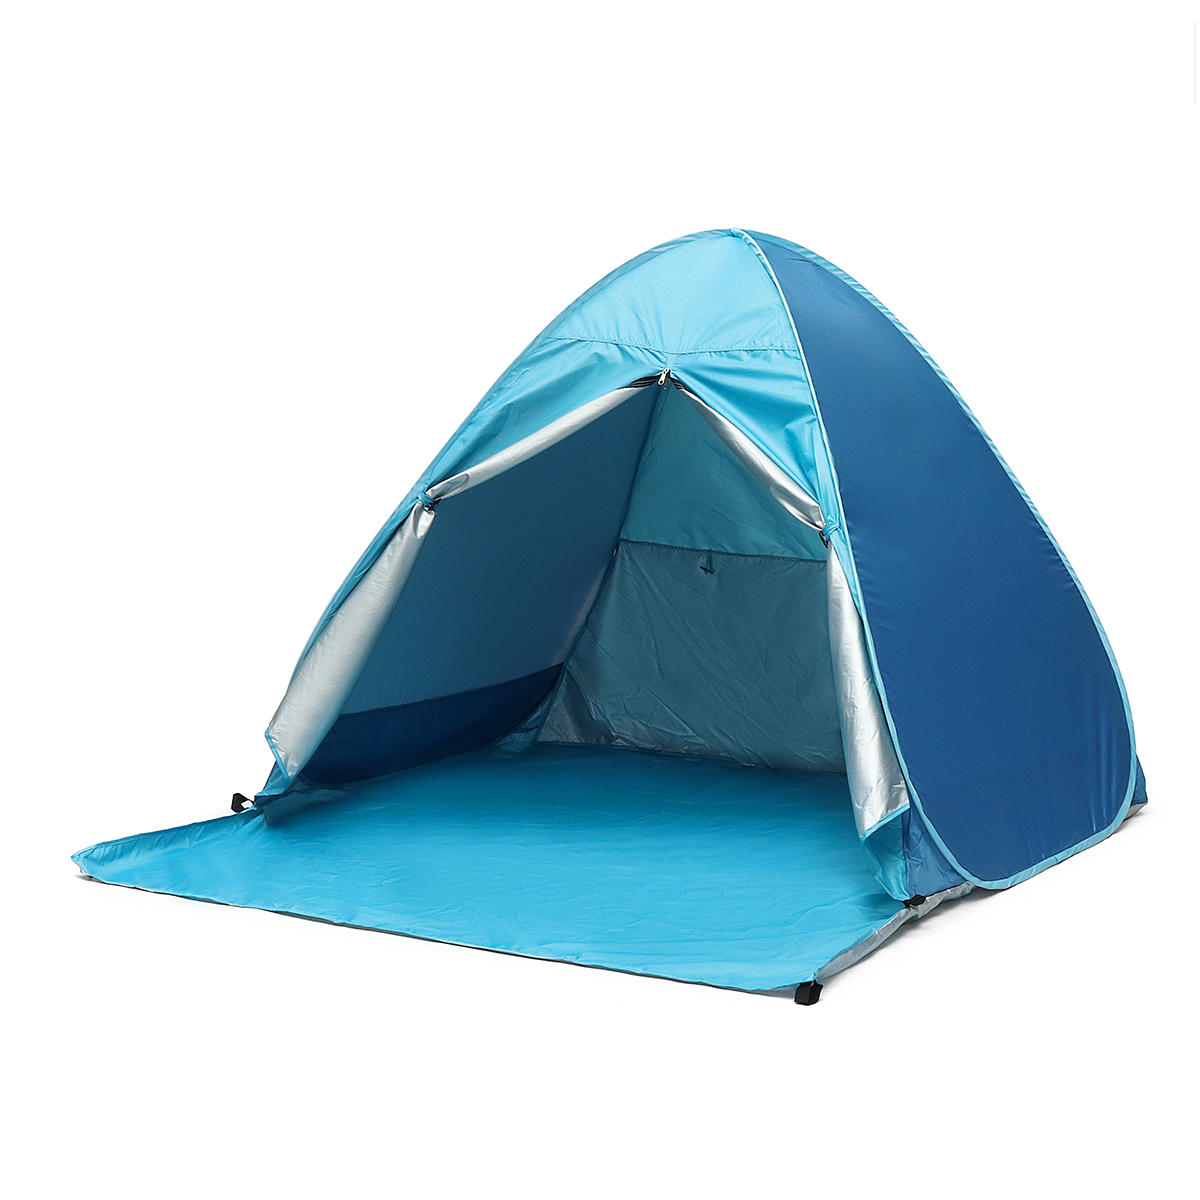 IPRee Outdoor 4 People Camping Beach Pop Up Tent Automatic Waterproof Anti-UV  Sunshade Canopy